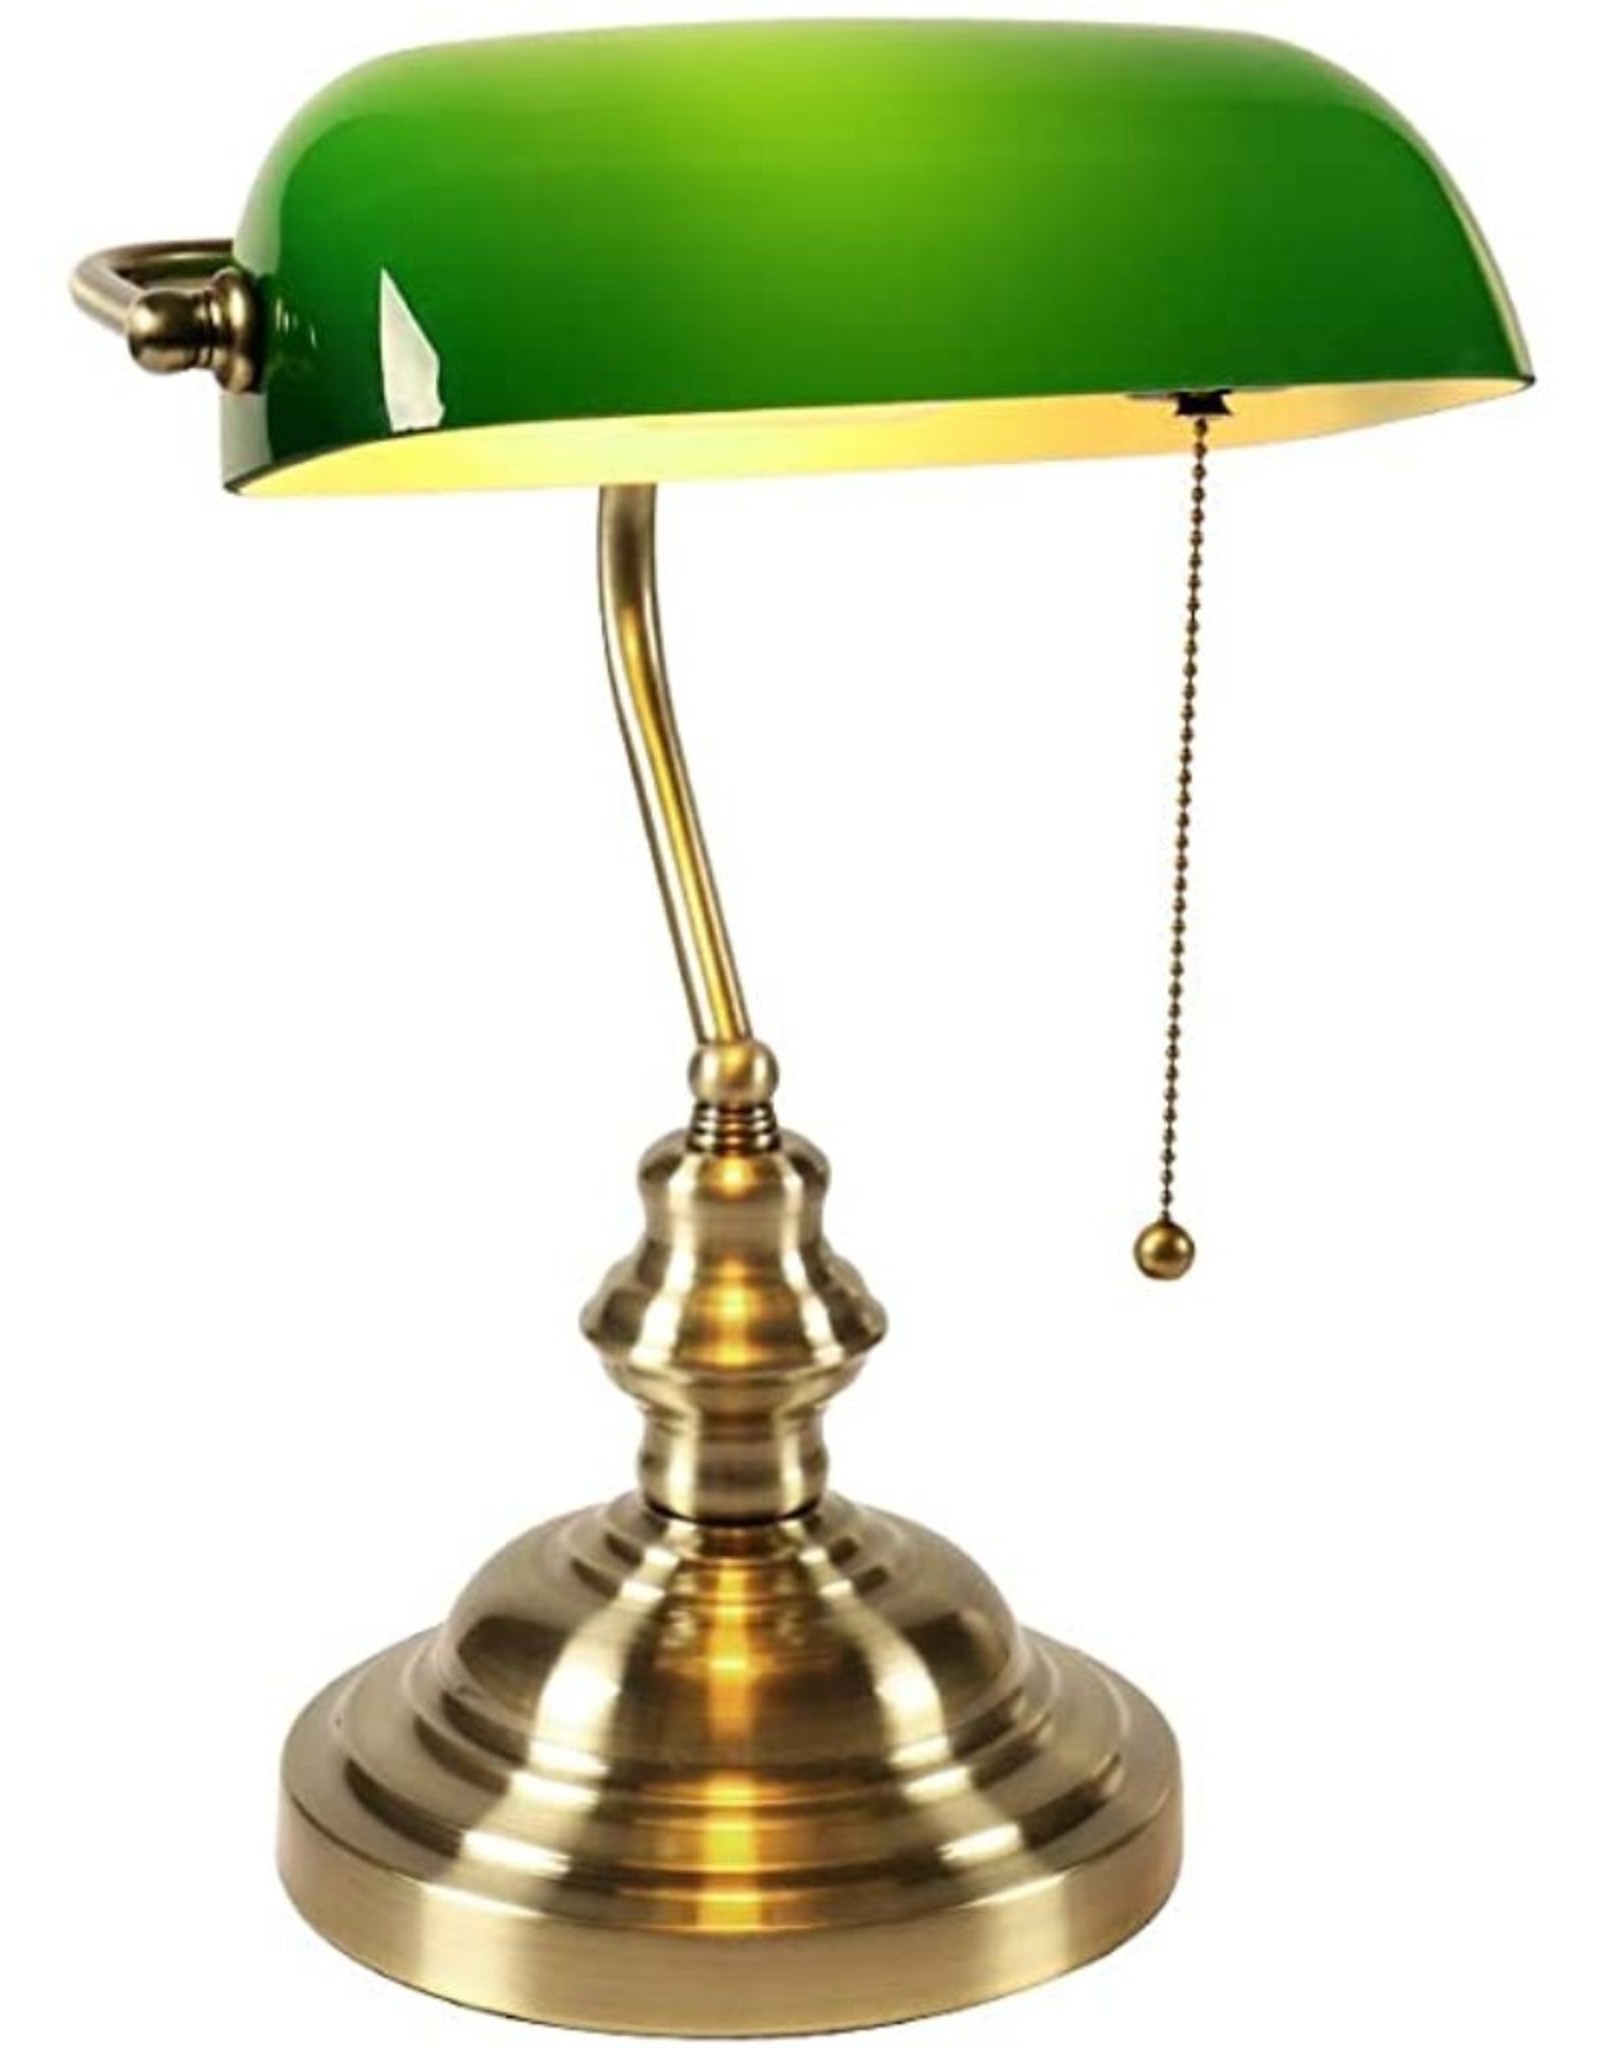 Trukado Miscellaneous - Solid Brass Banker's Lamp with green glass shade Art deco (single arm)